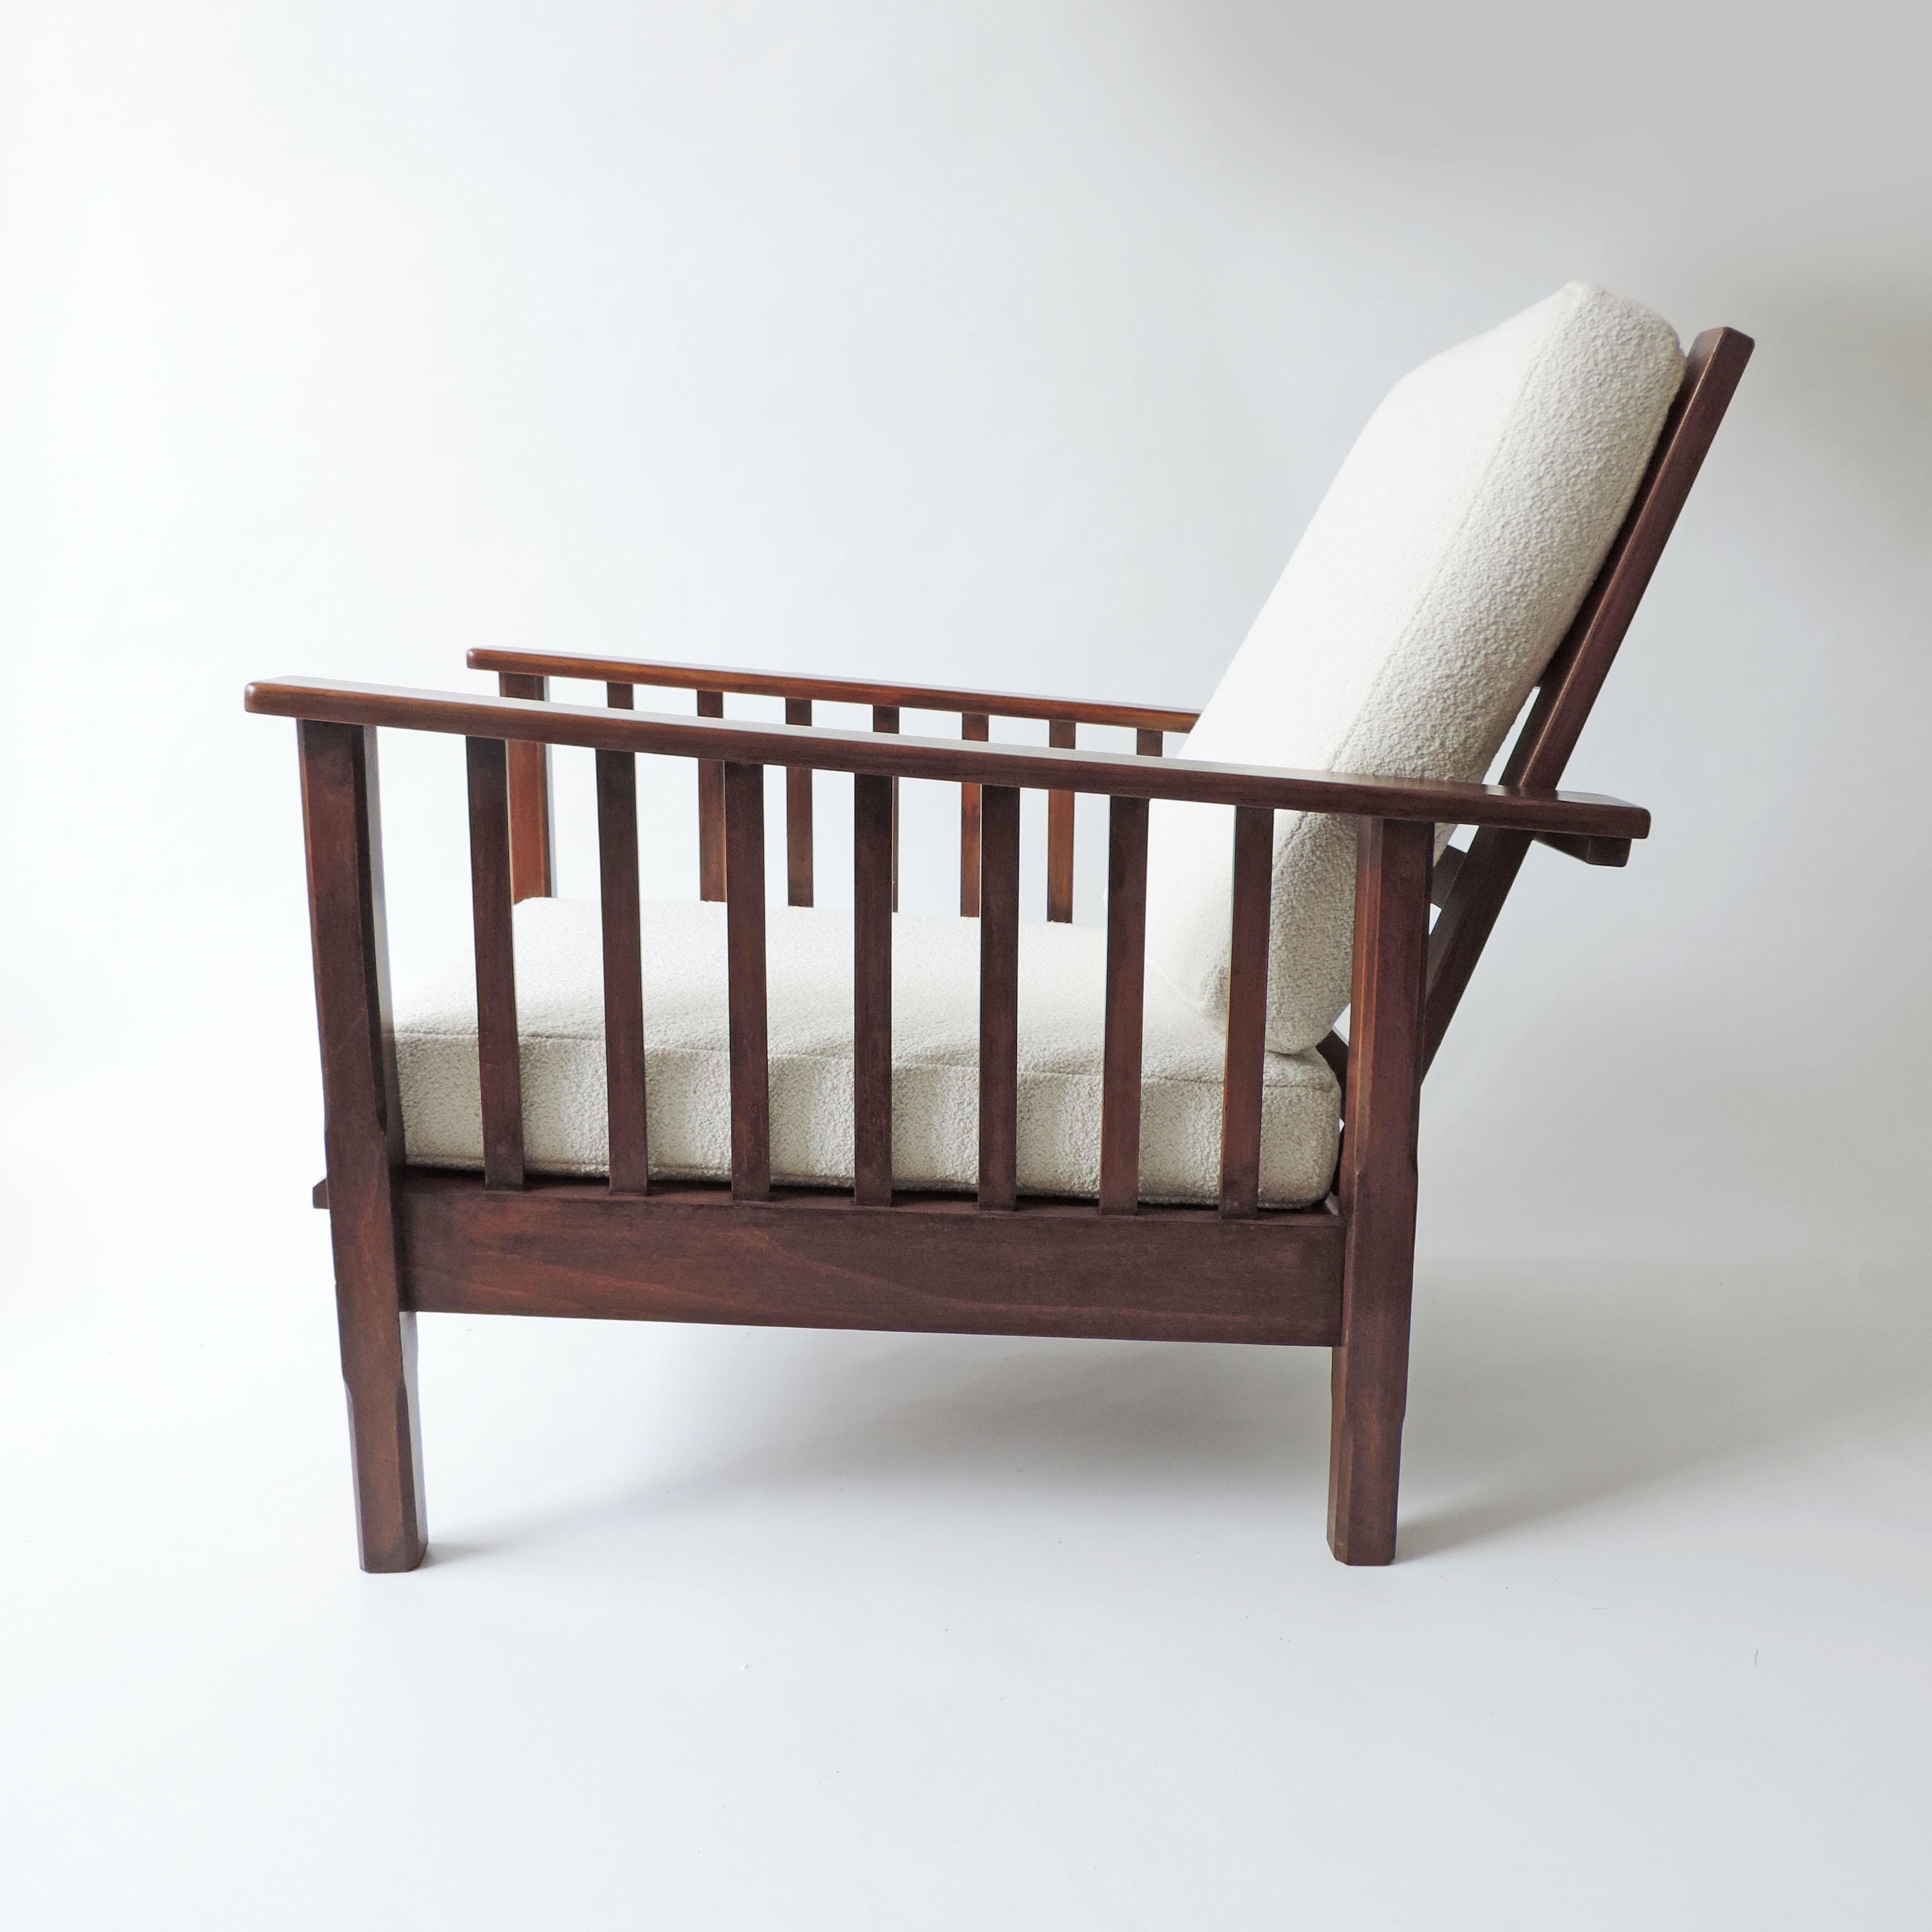 Italian Rationalist Adjustable Wooden Lounge Chair, Italy 1940s For Sale 4